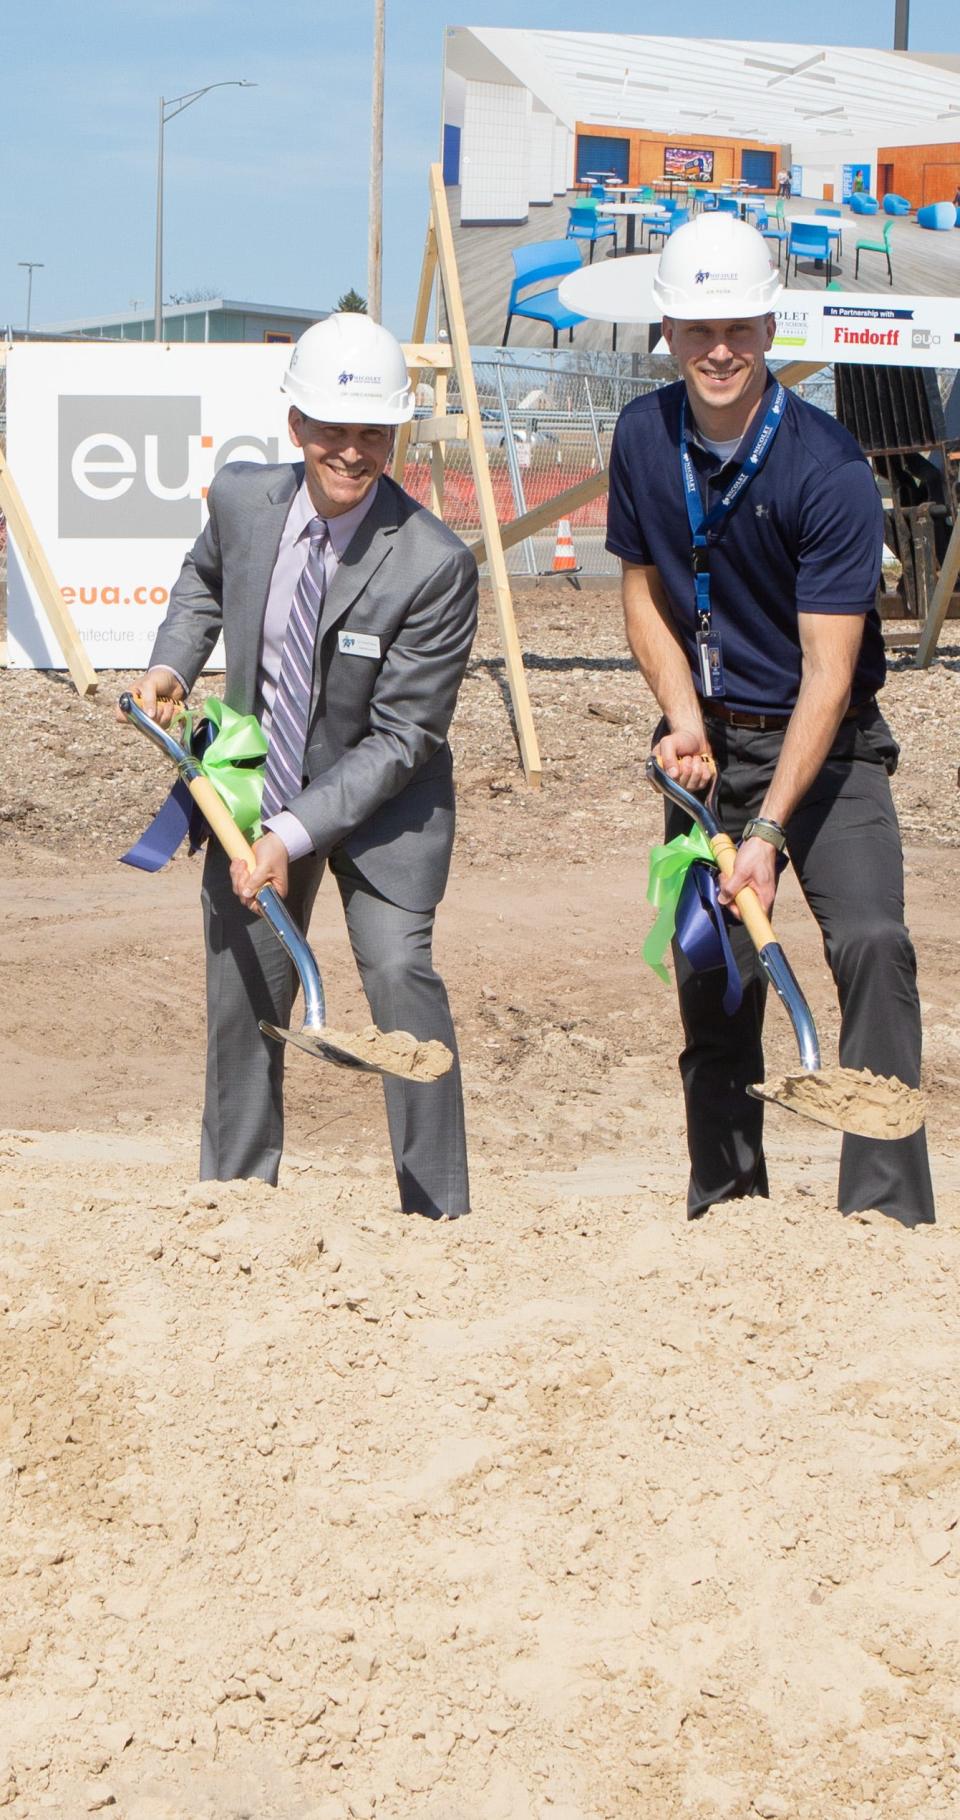 Nicolet Union High School District Superintendent Greg Kabara (left) and Nicolet Union High School Principal Joe Patek participate in a groundbreaking ceremony April 13 to kick off construction on $77.4 million worth of facilities projects approved by voters in April 2022.